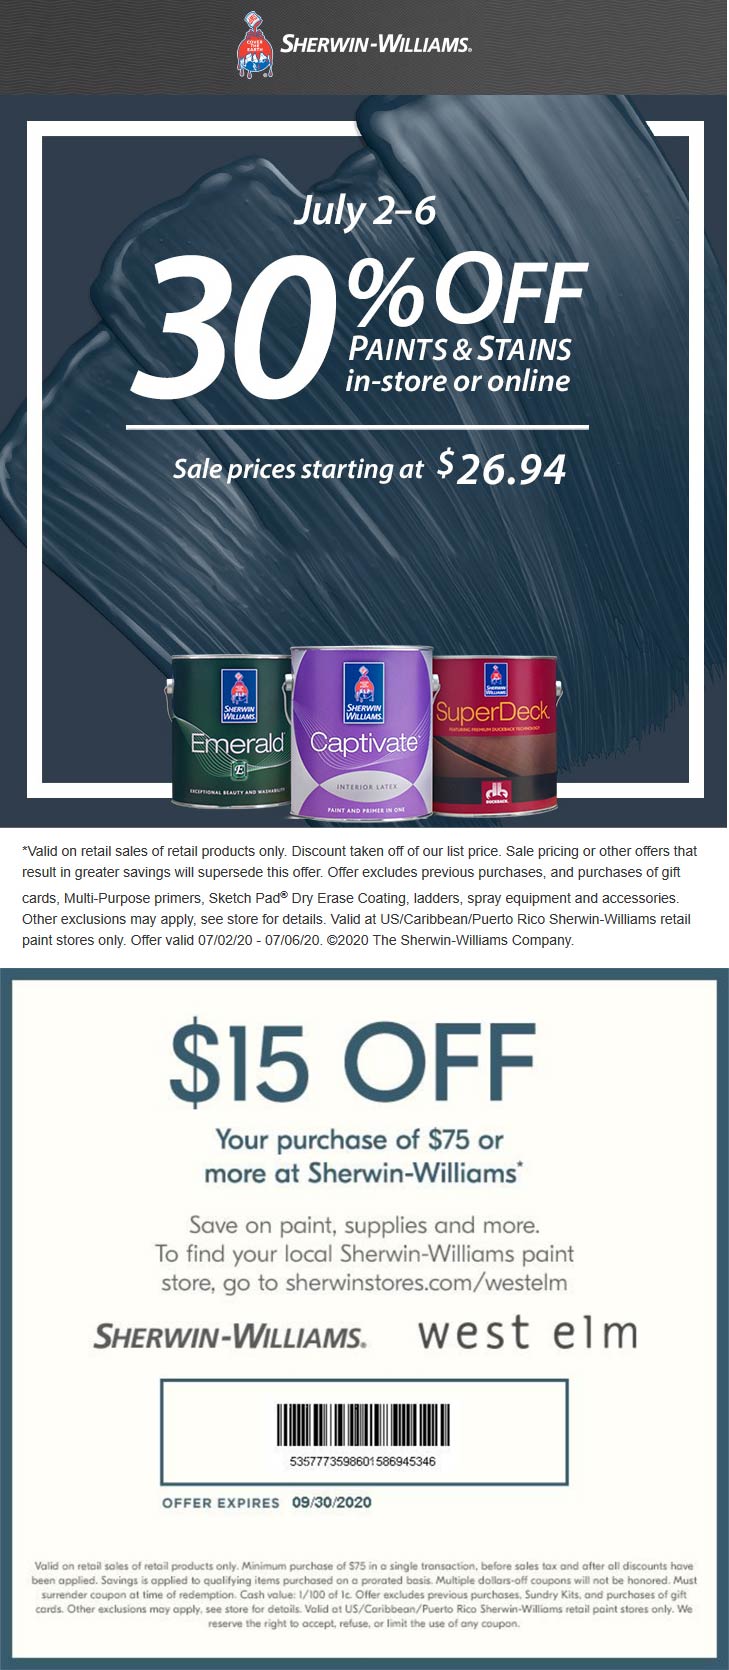 August 2021 30 Off Paints Stains At Sherwin Williams Ditto Online Sherwinwilliams Coupon Promo Code The Coupons App